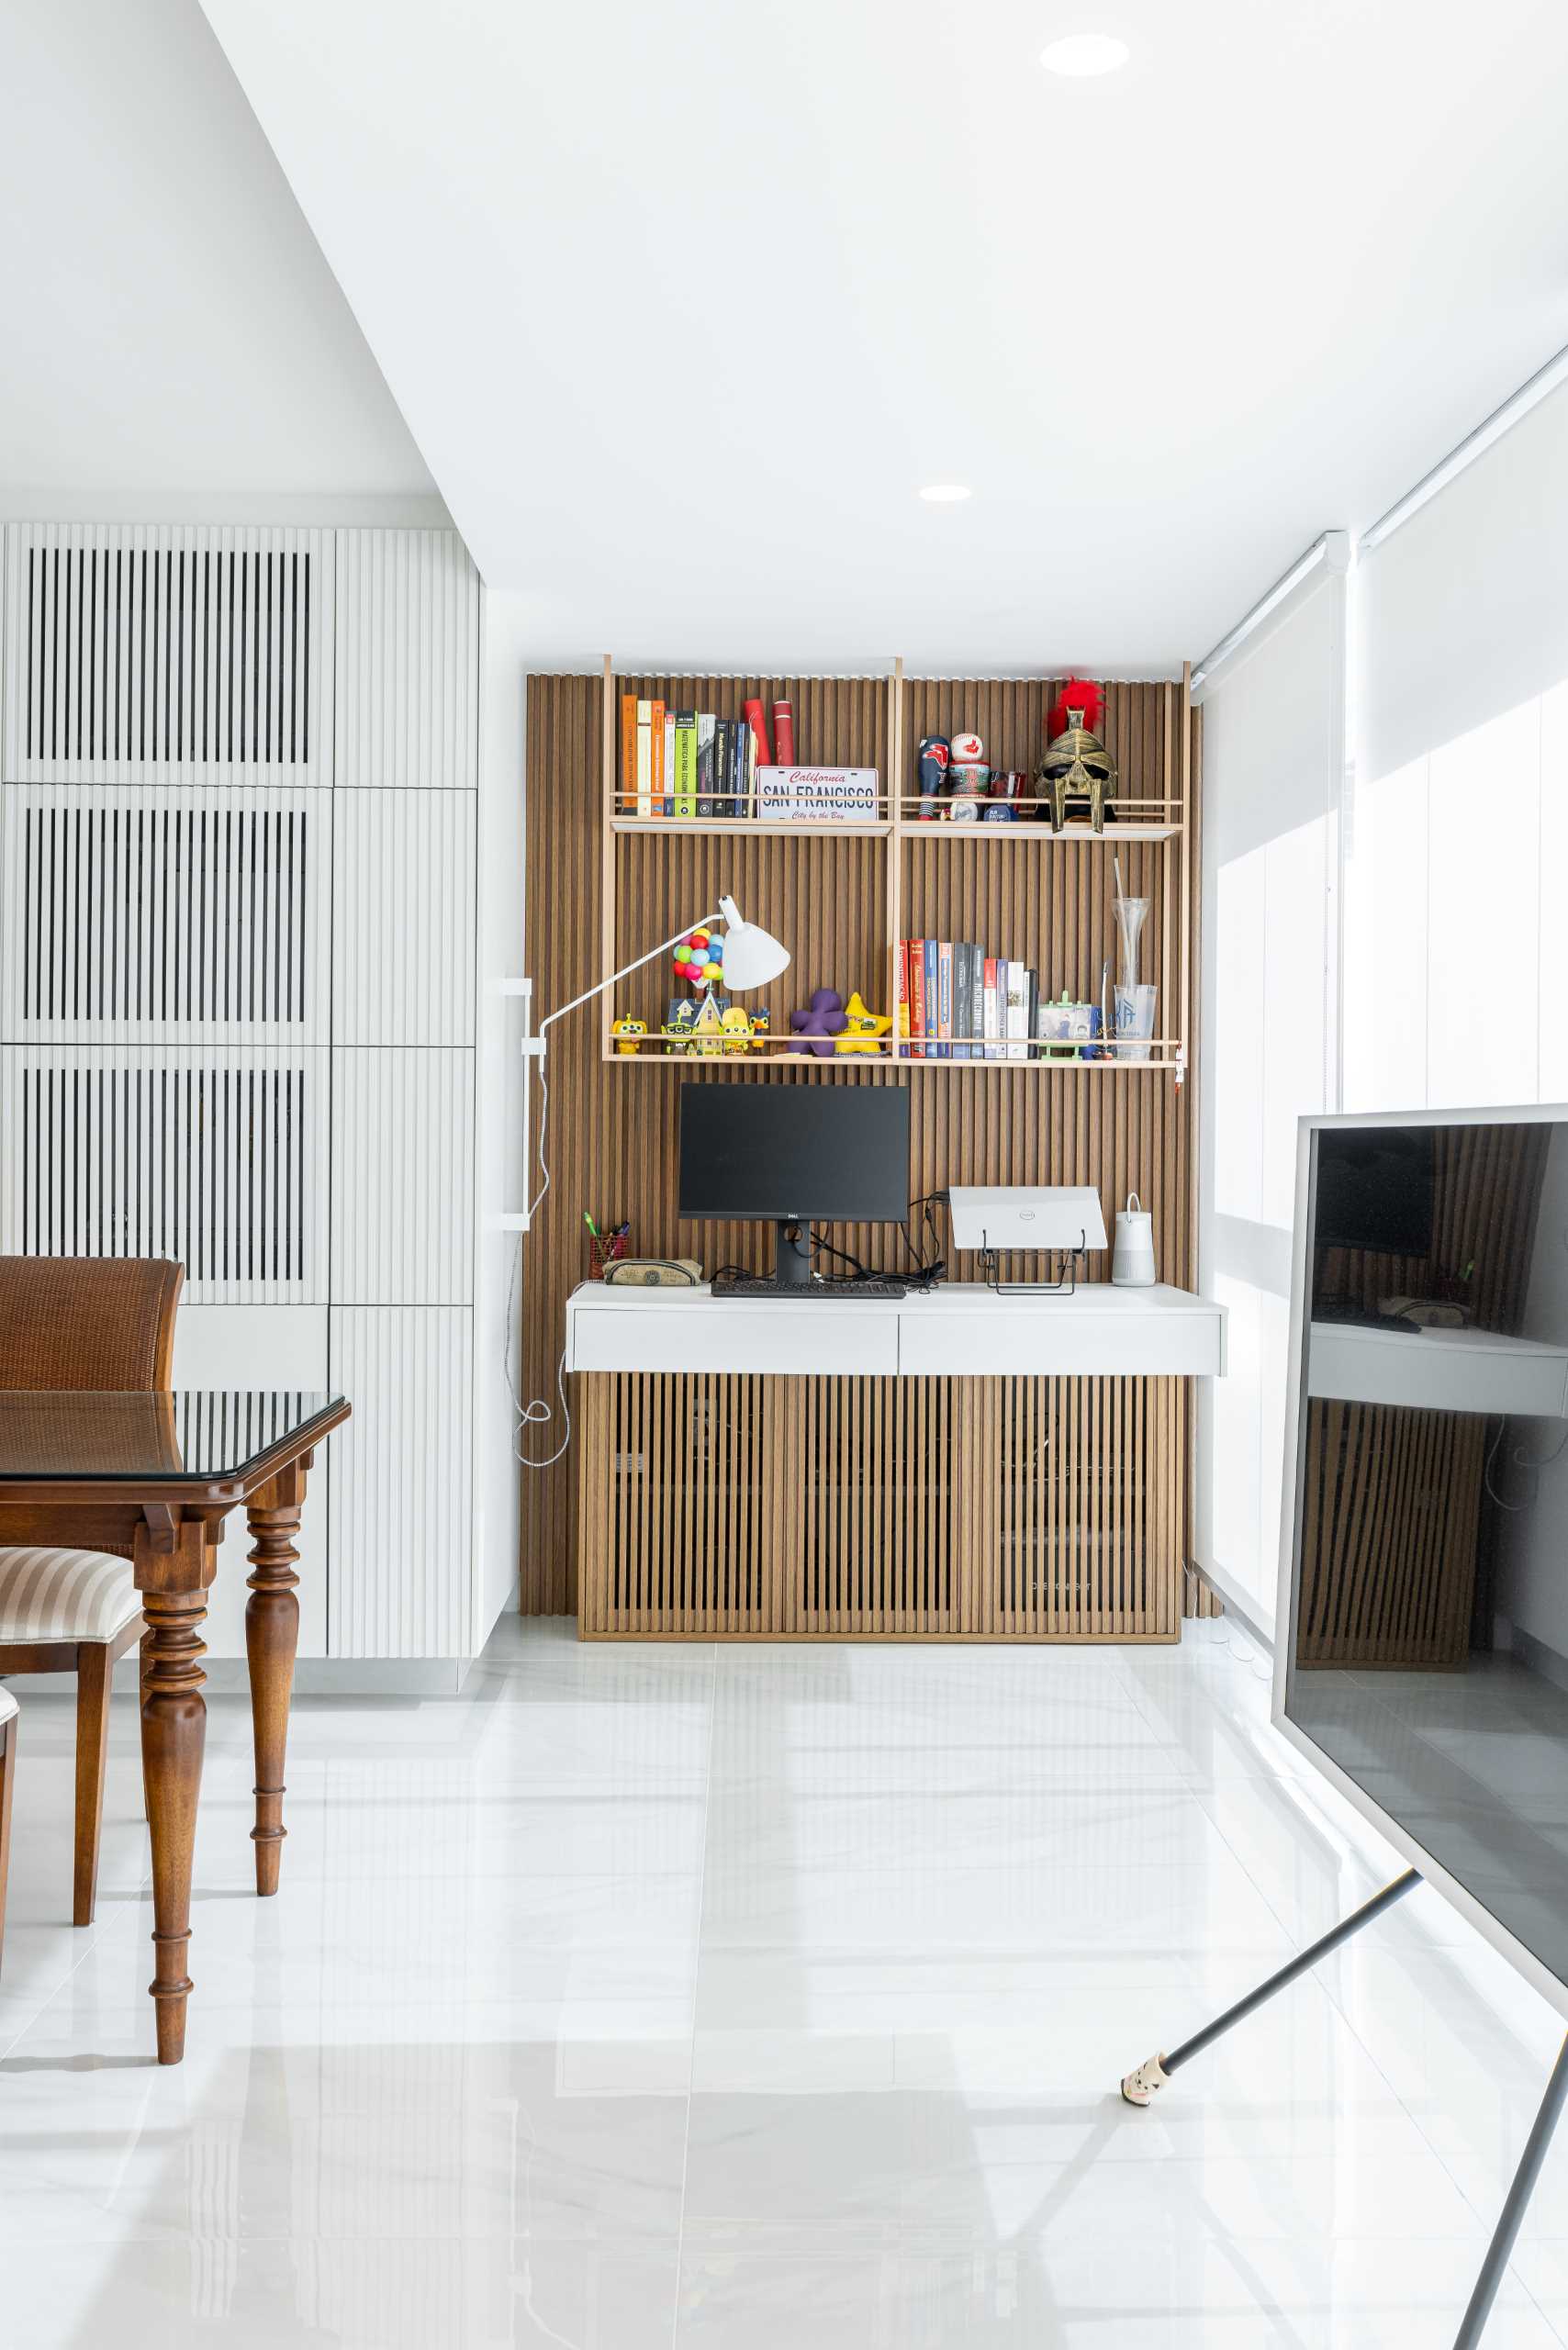 A wood accent wall is featured by the windows and acts as a backdrop for the desk.